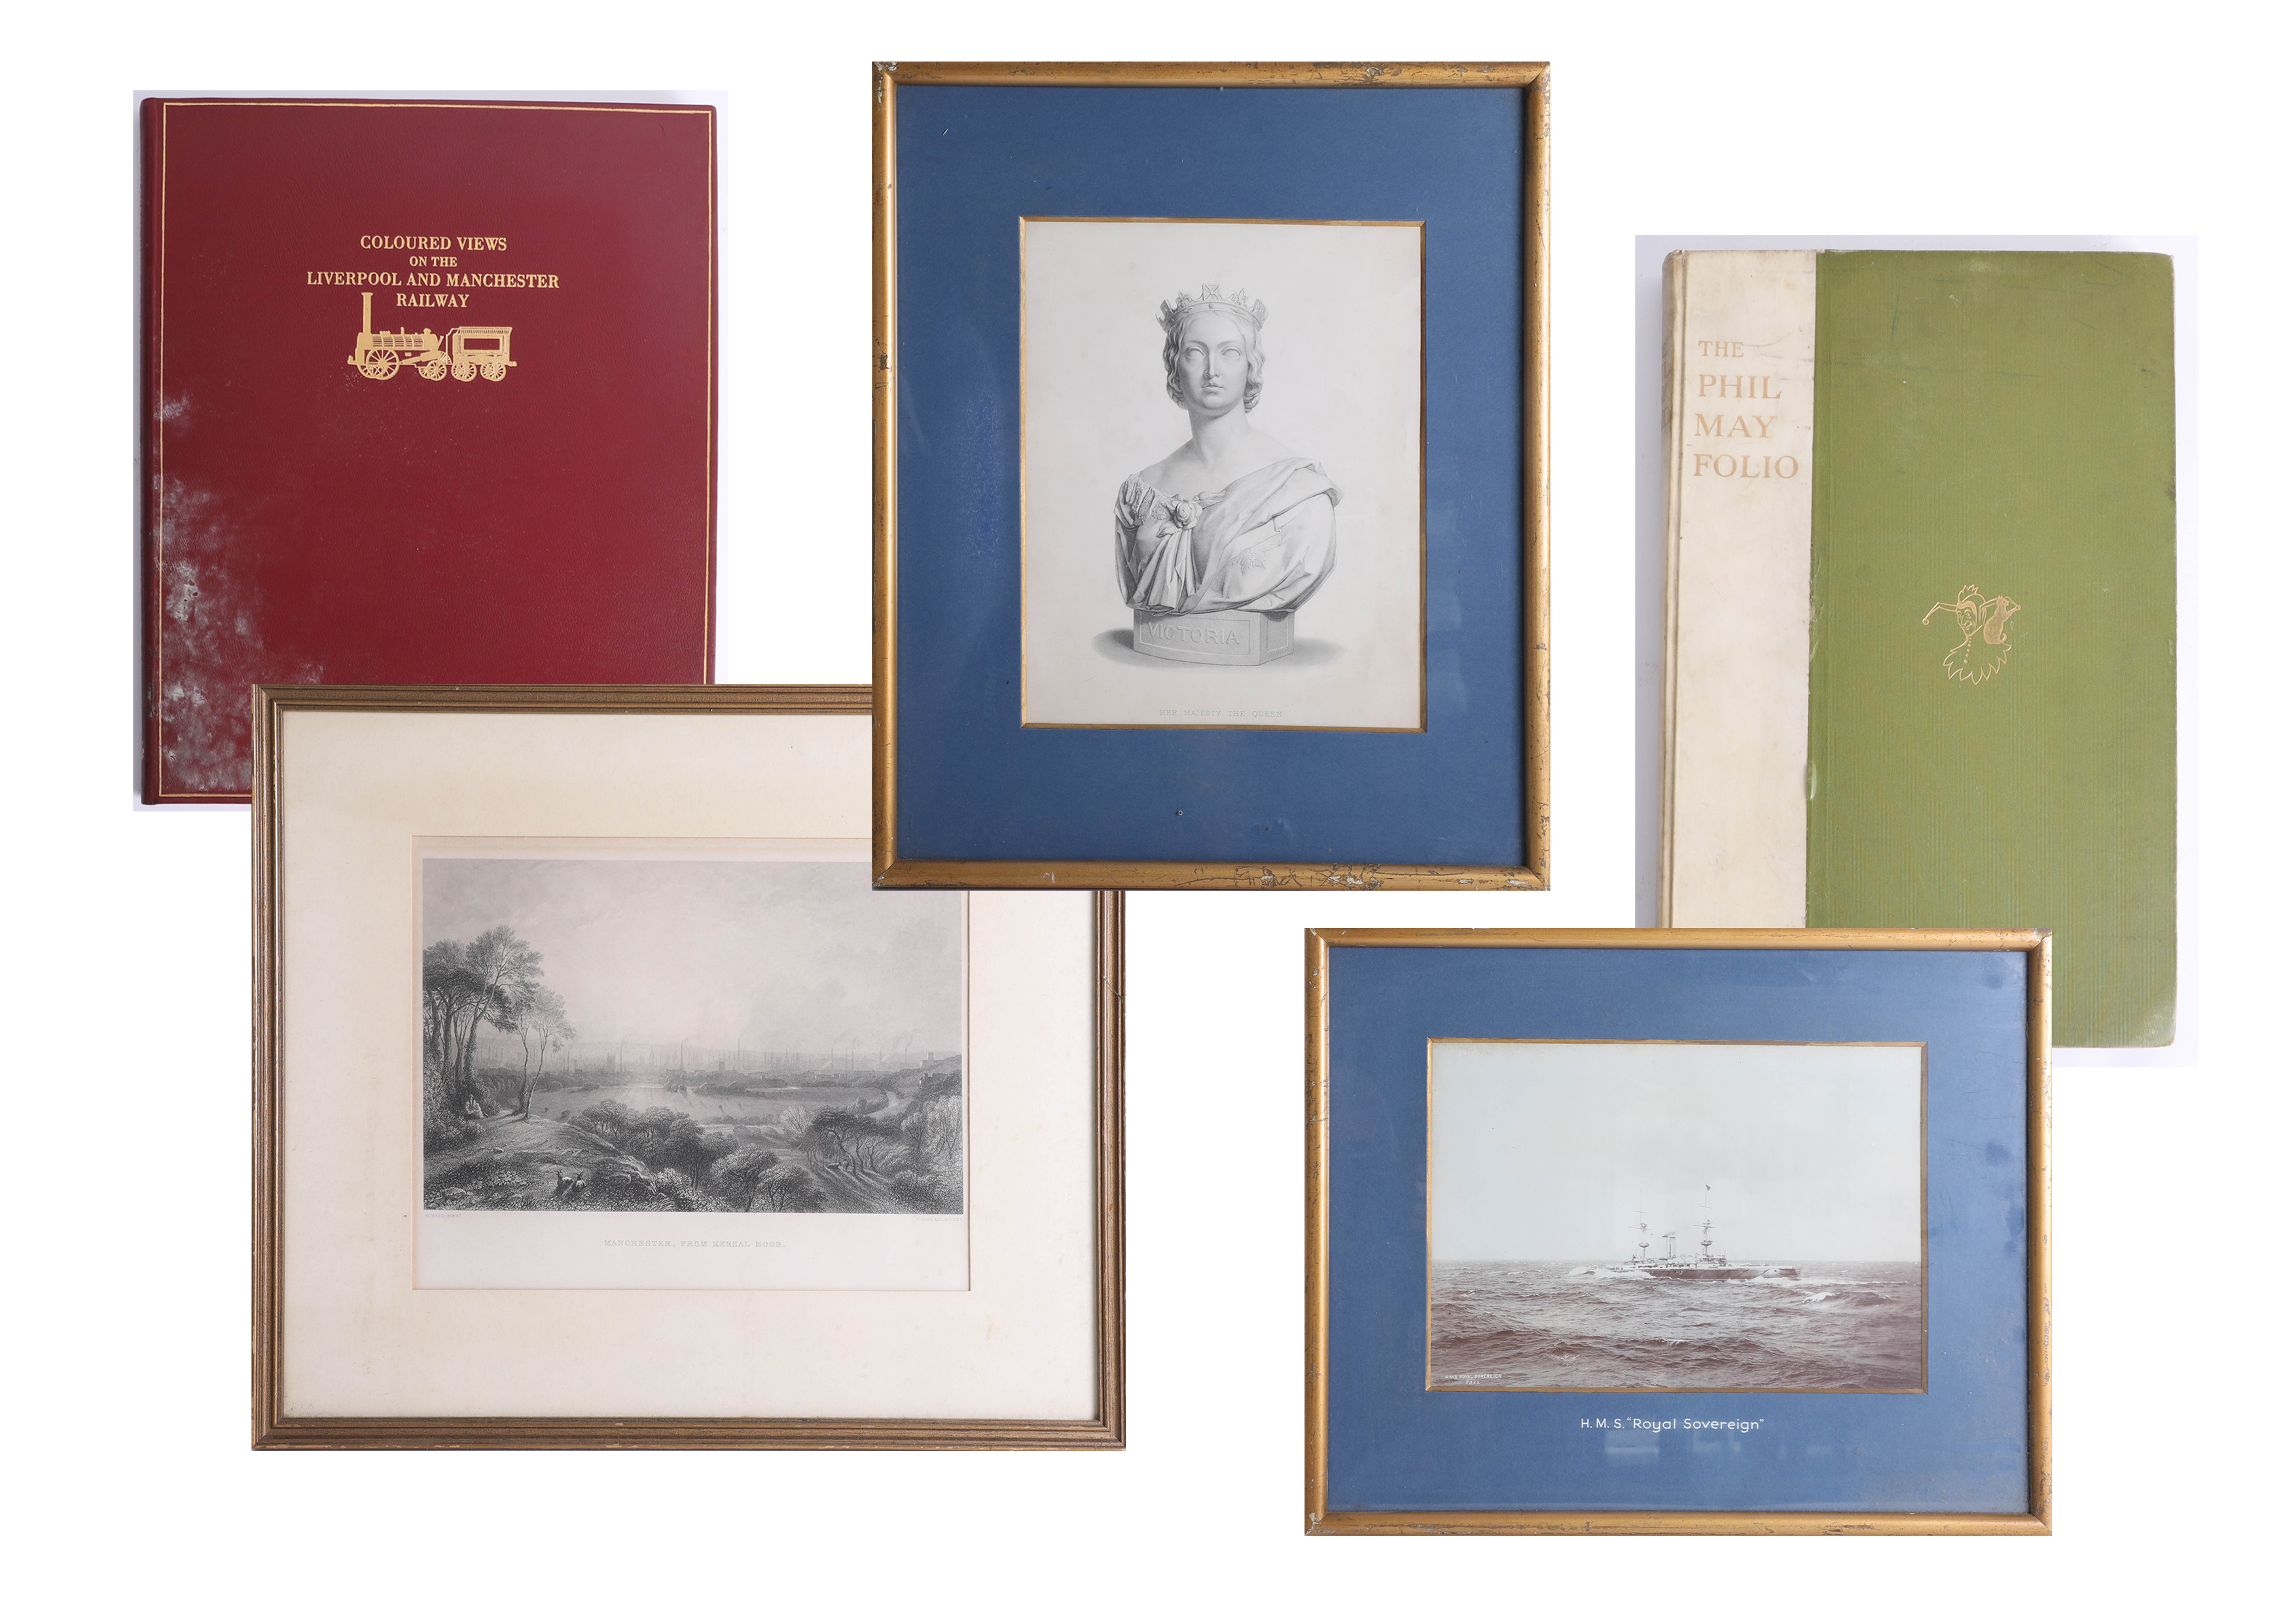 Various prints including photograph H.M.S. Royal Sovereign, The Phil May Folio also coloured views